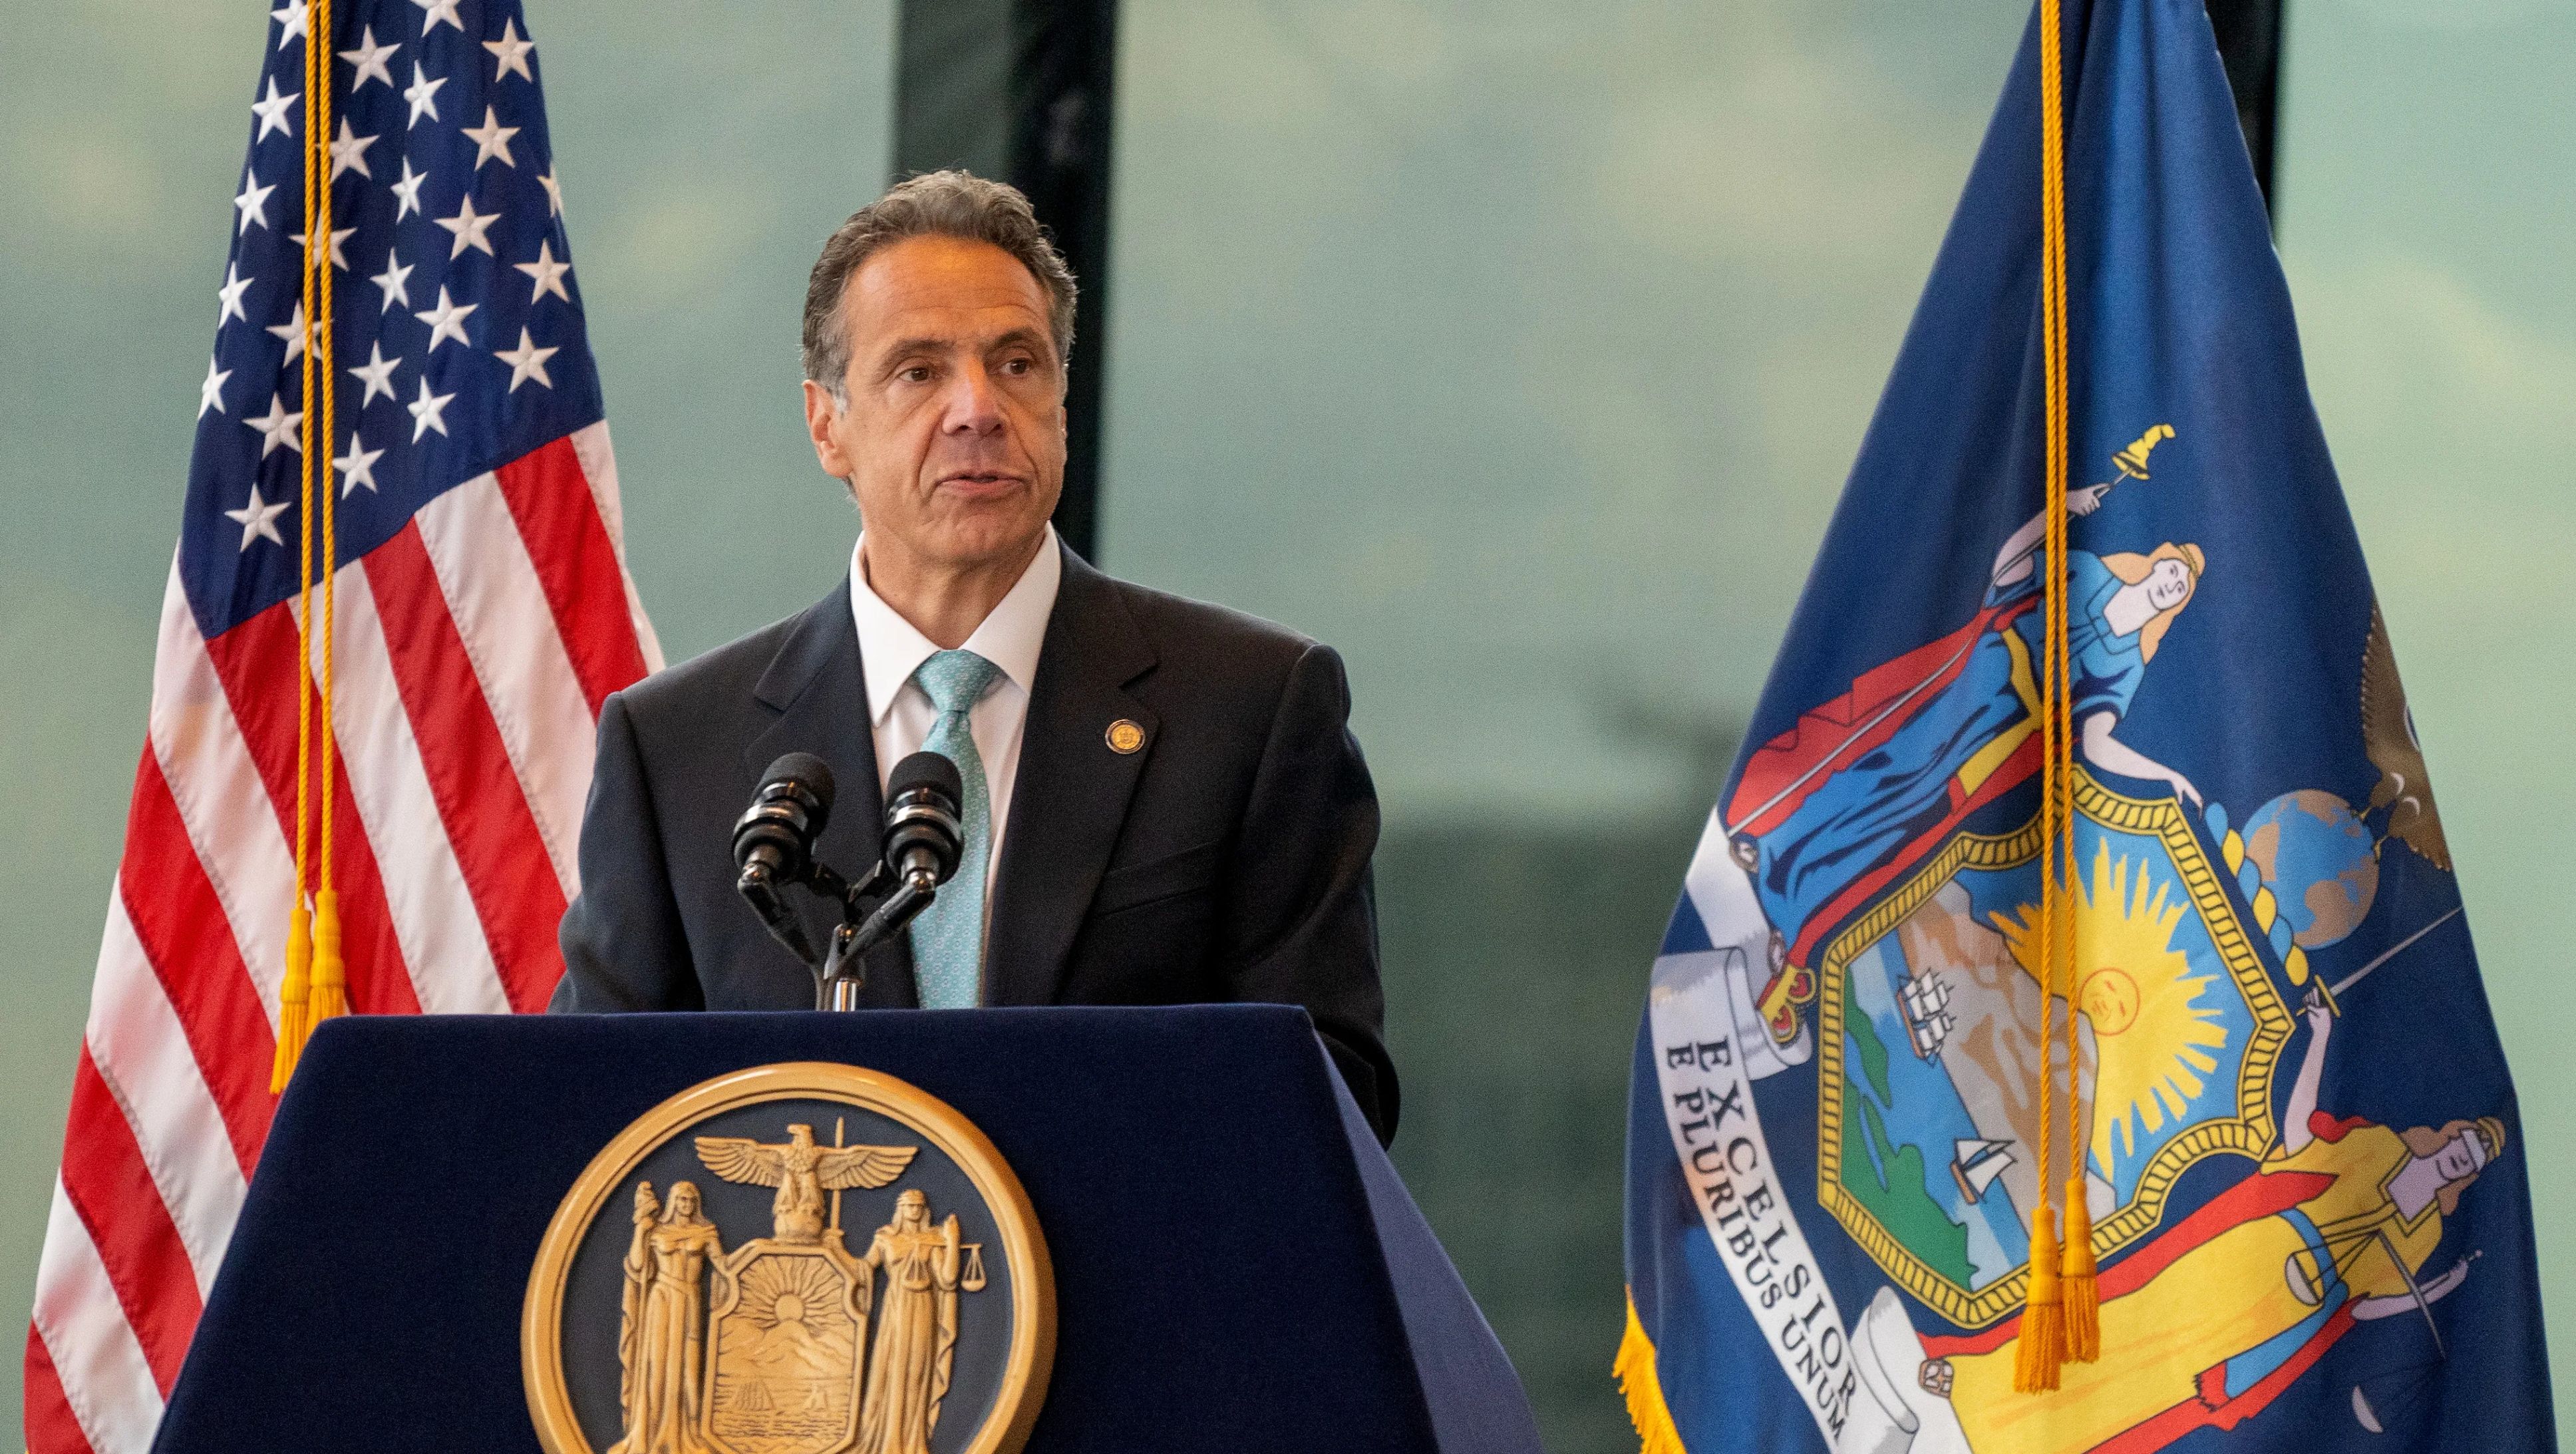 Andrew Cuomo speaks at a press conference.